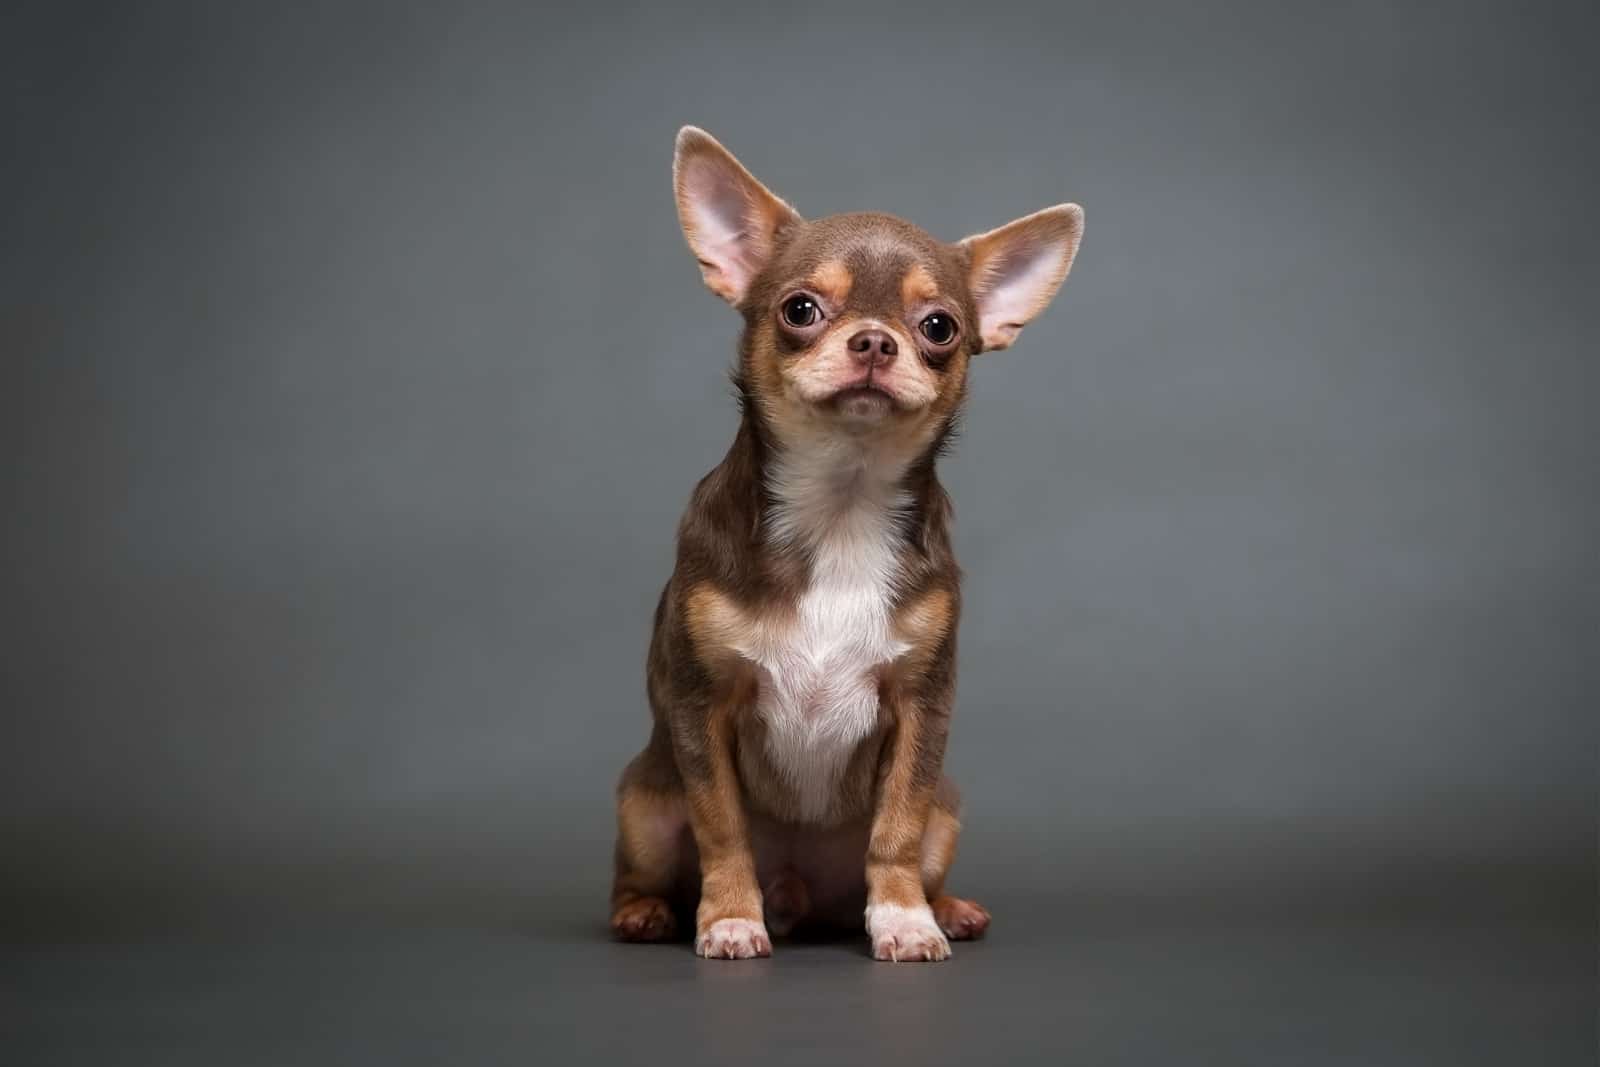 chihuahua puppy on a gray background studio photo